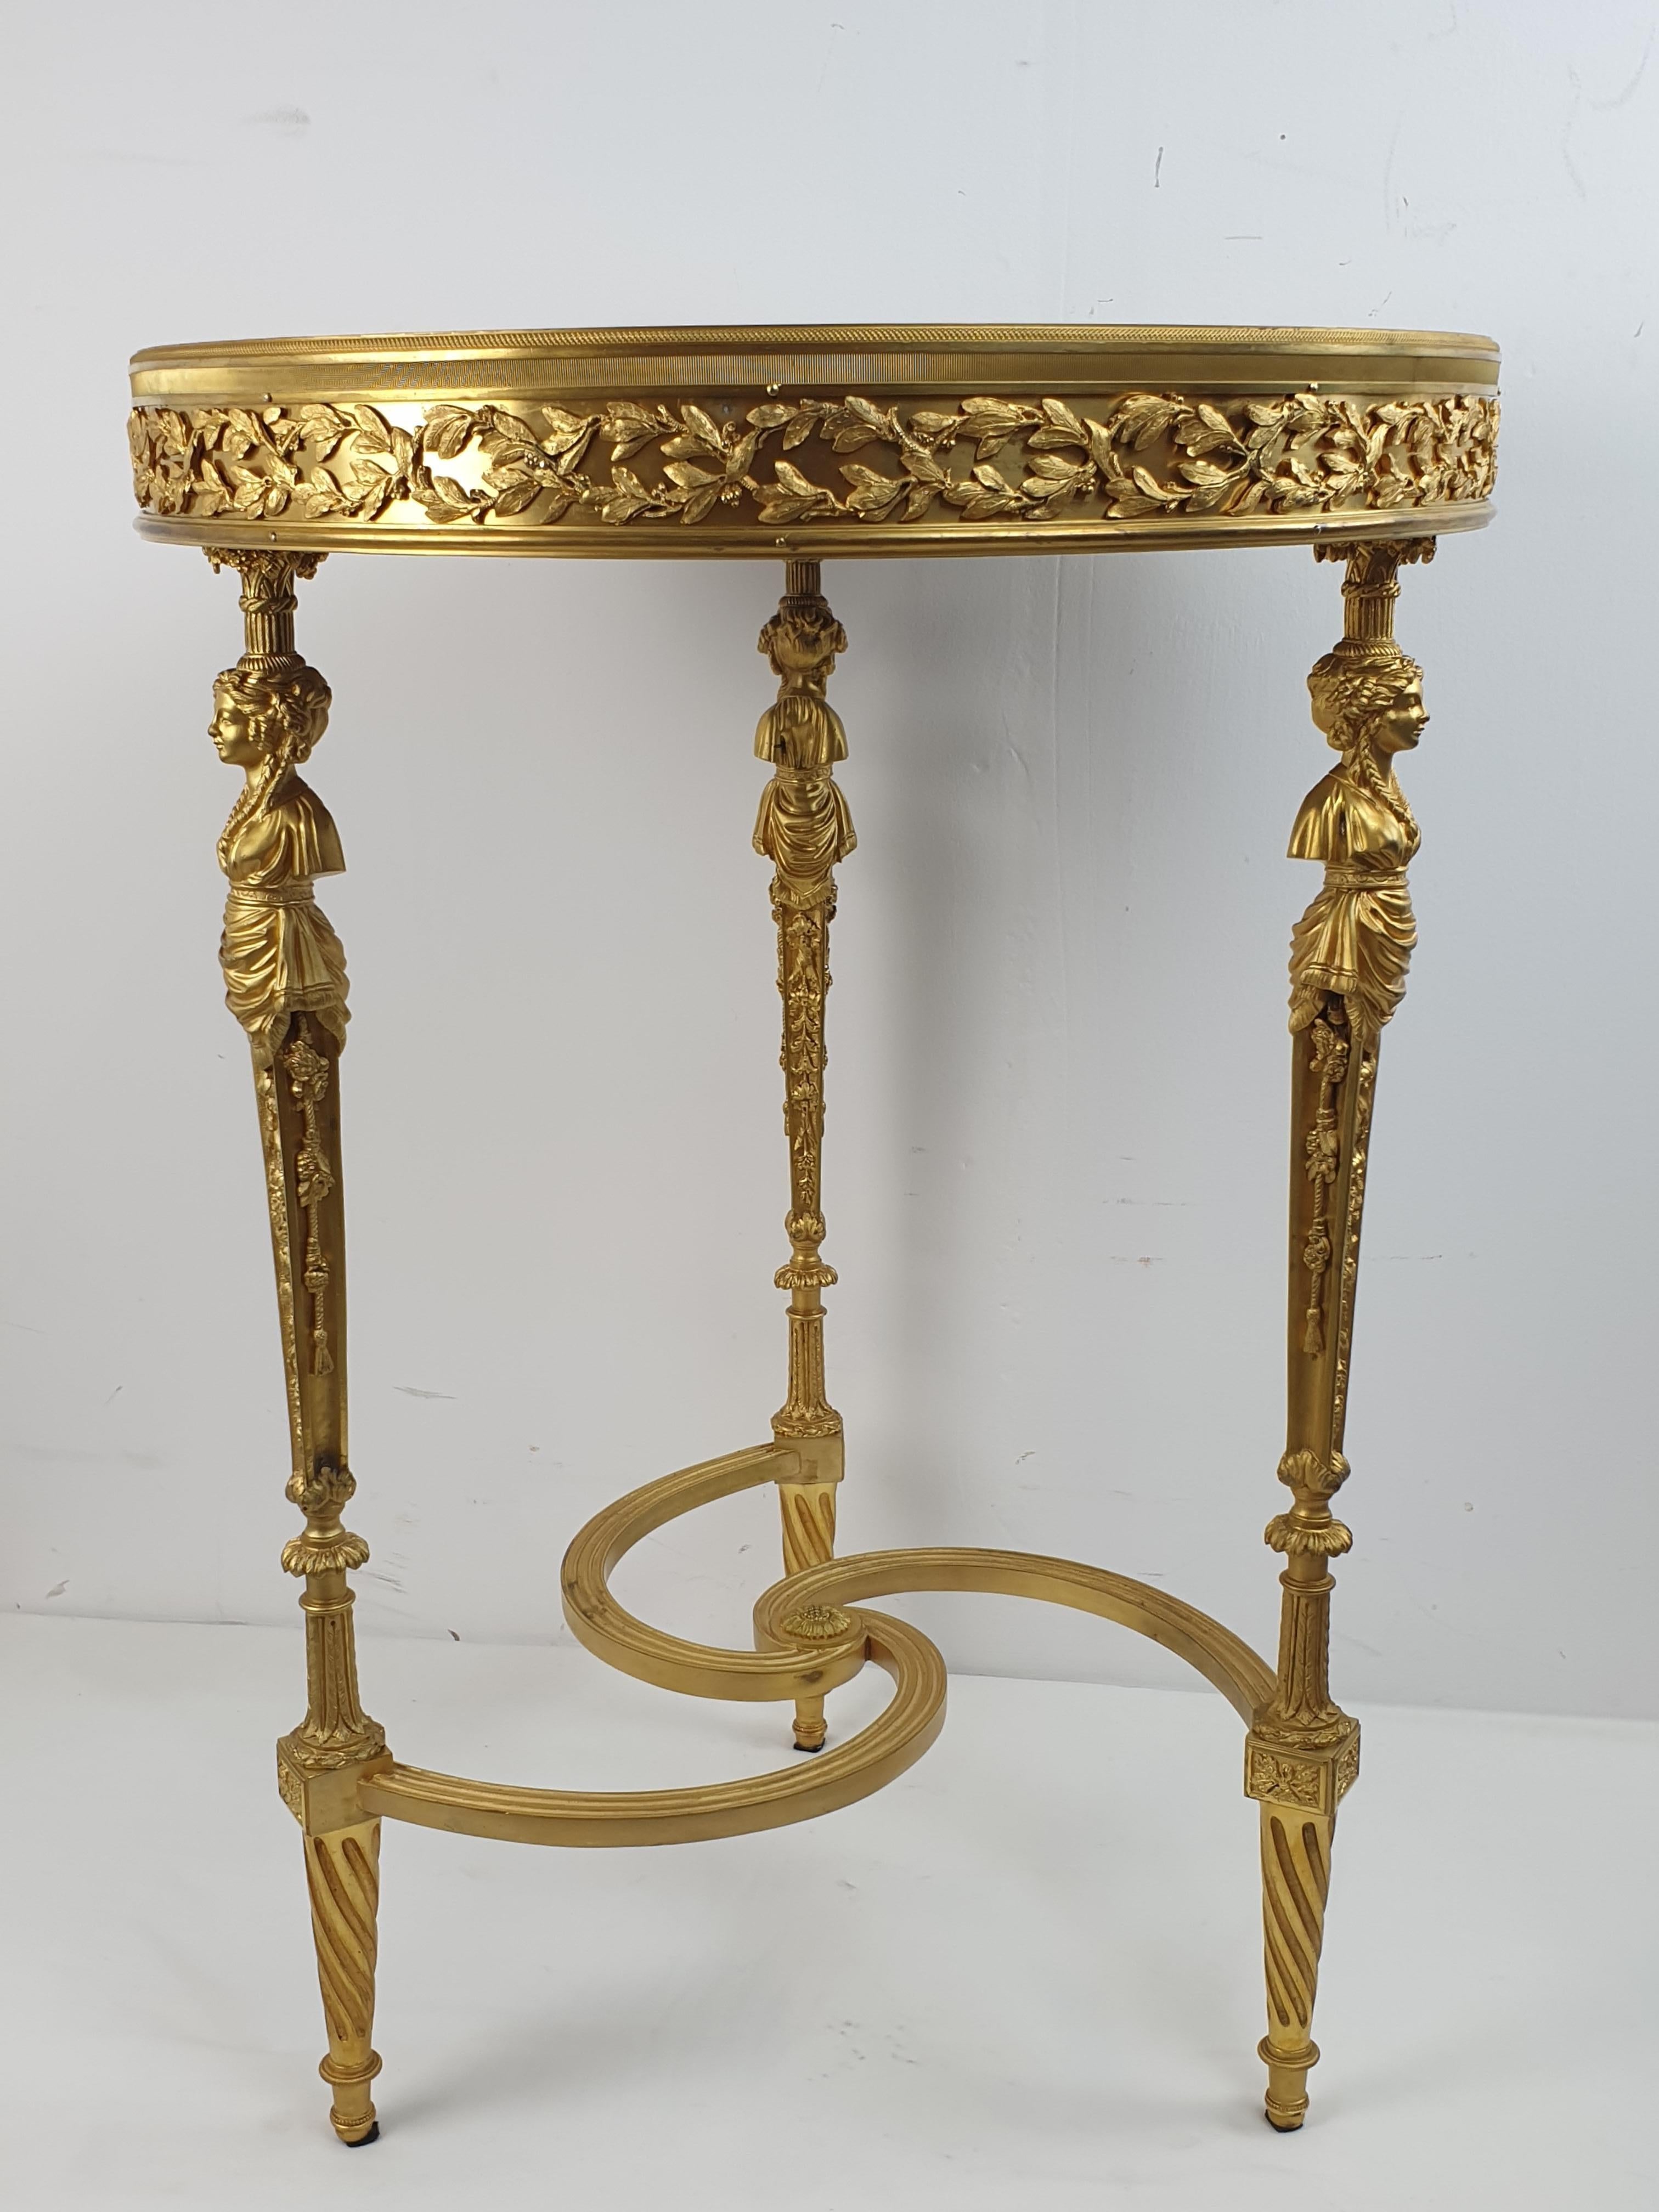 Gueridon table entirely made of gilded bronze, with a beautiful malachite top. Model attributed to Paul Sormani, late 19th century, on which indicates the shape of the brozne cariathydes. Great condition, the highest quality bronze details with an